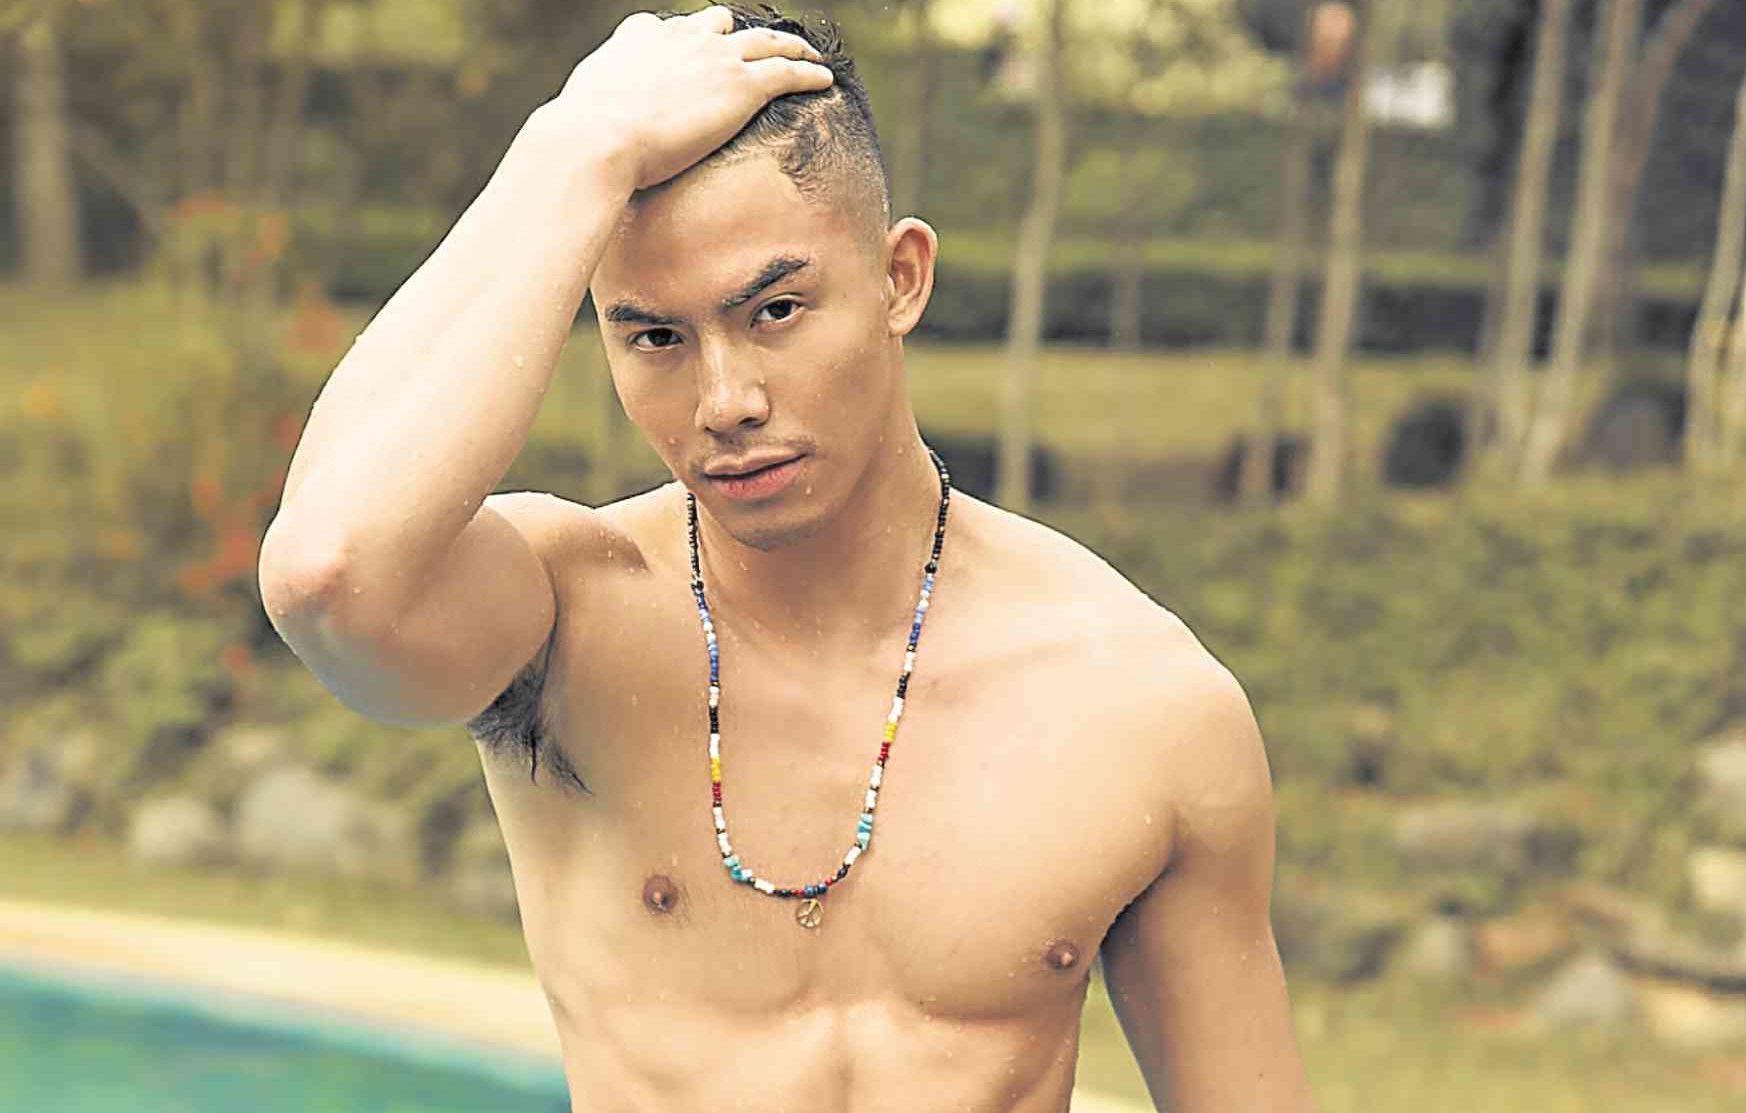 For Tony Labrusca, it’s disrespectful to call his biological father Dad | I...